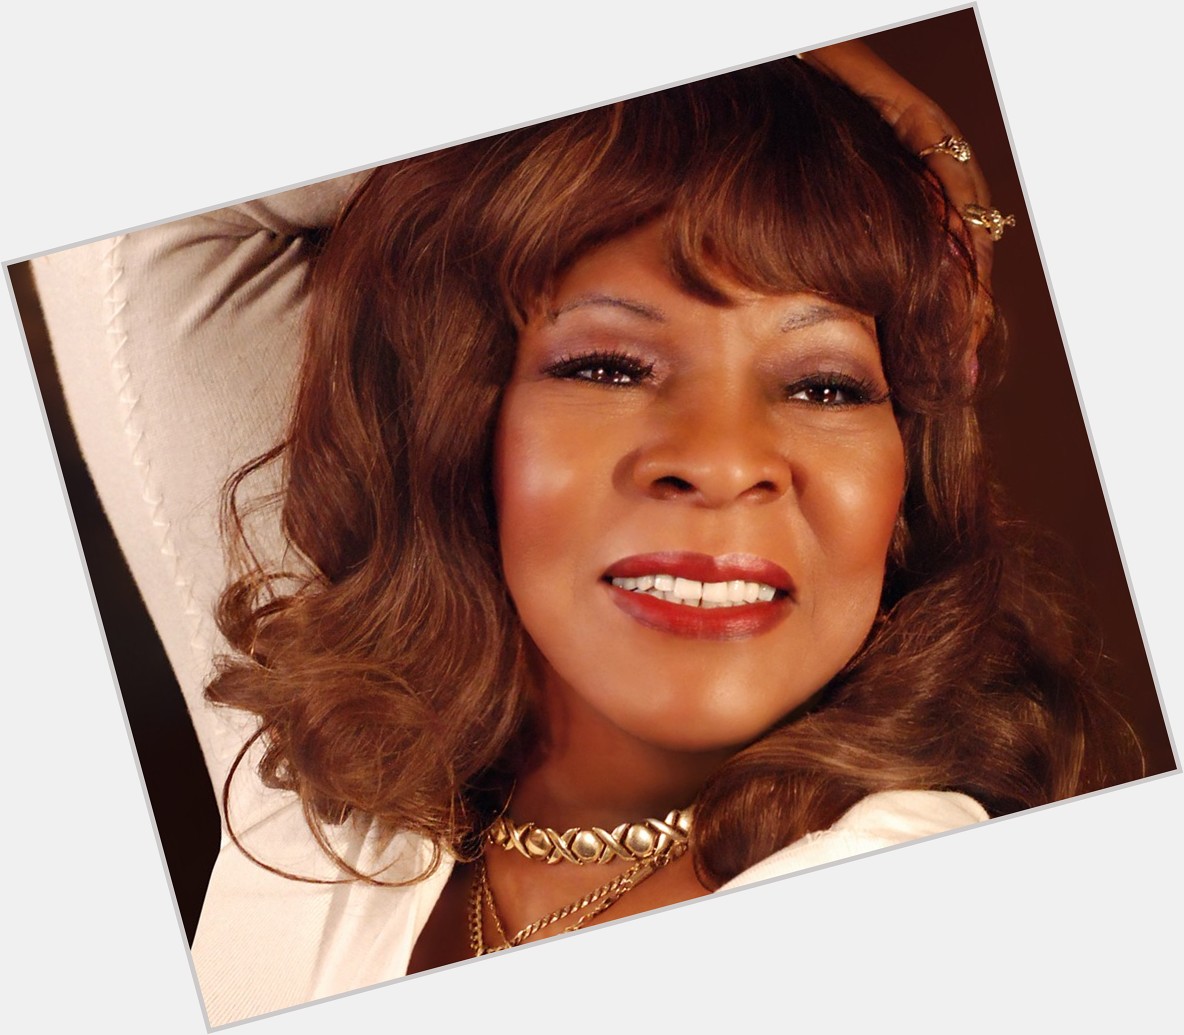 Happy Birthday to Martha Reeves, 79 today 